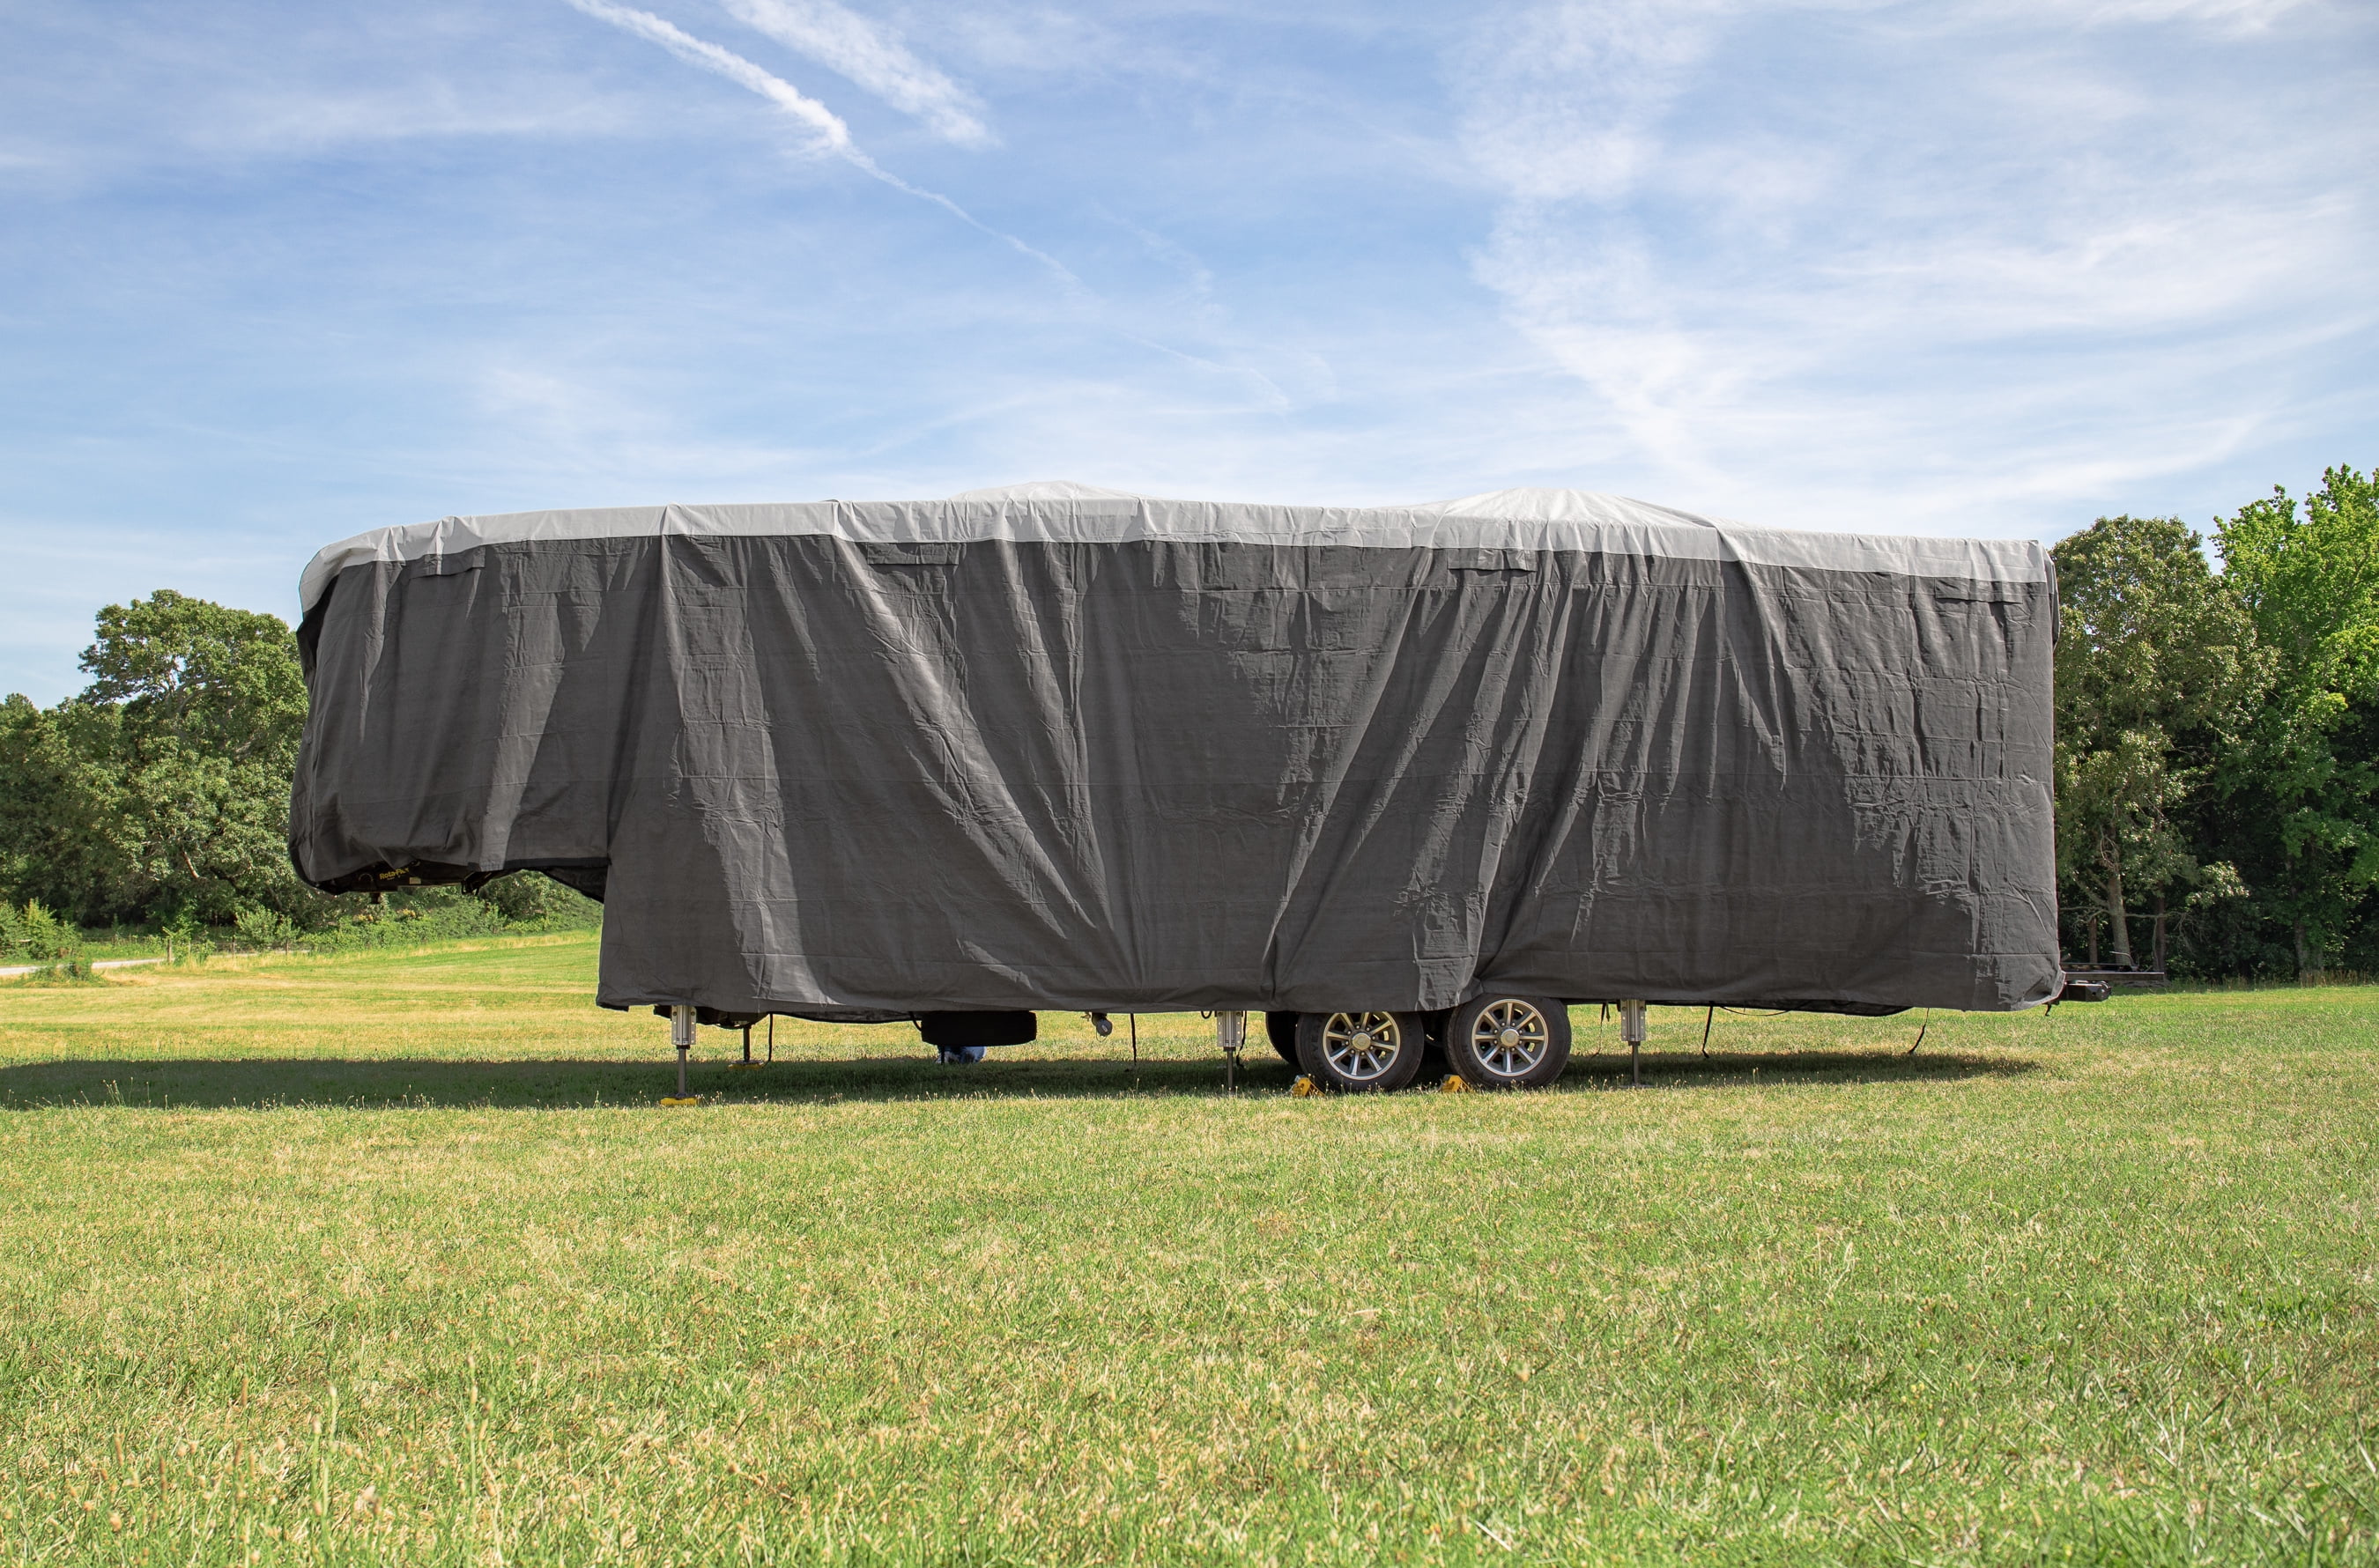 Camco ULTRAGuard RV Cover Fits Fifth Wheel Trailers 40 to 42-feet  Extremely Durable Design that Protects Against the Elements (45759) 